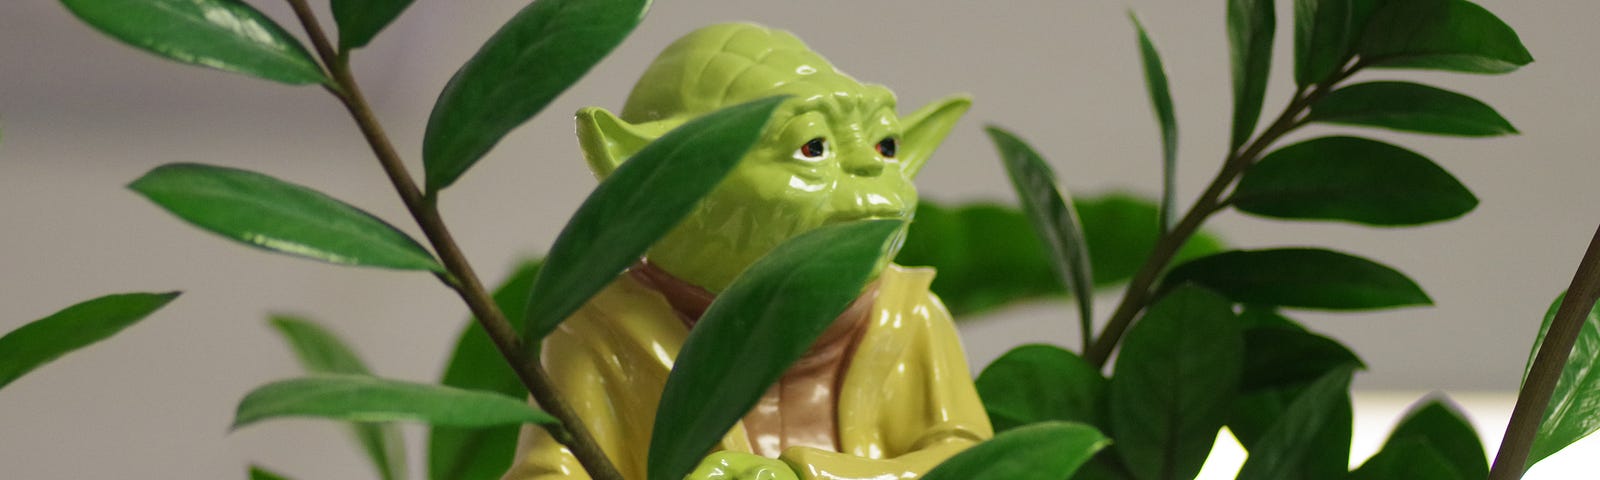 photo of a Yoda figurine looking out from behind a houseplant -Mindfulness